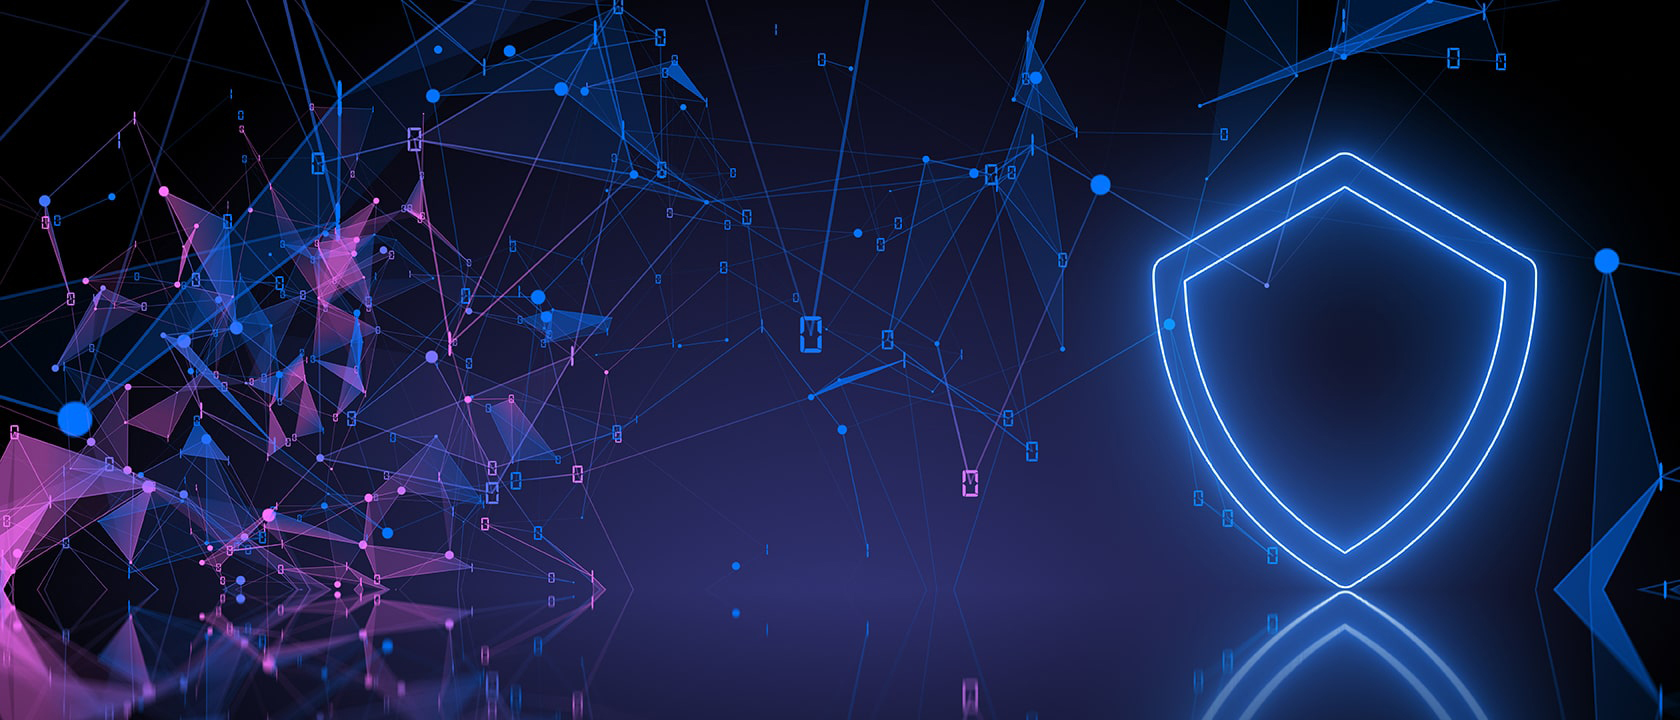 Abstract cybersecurity background image